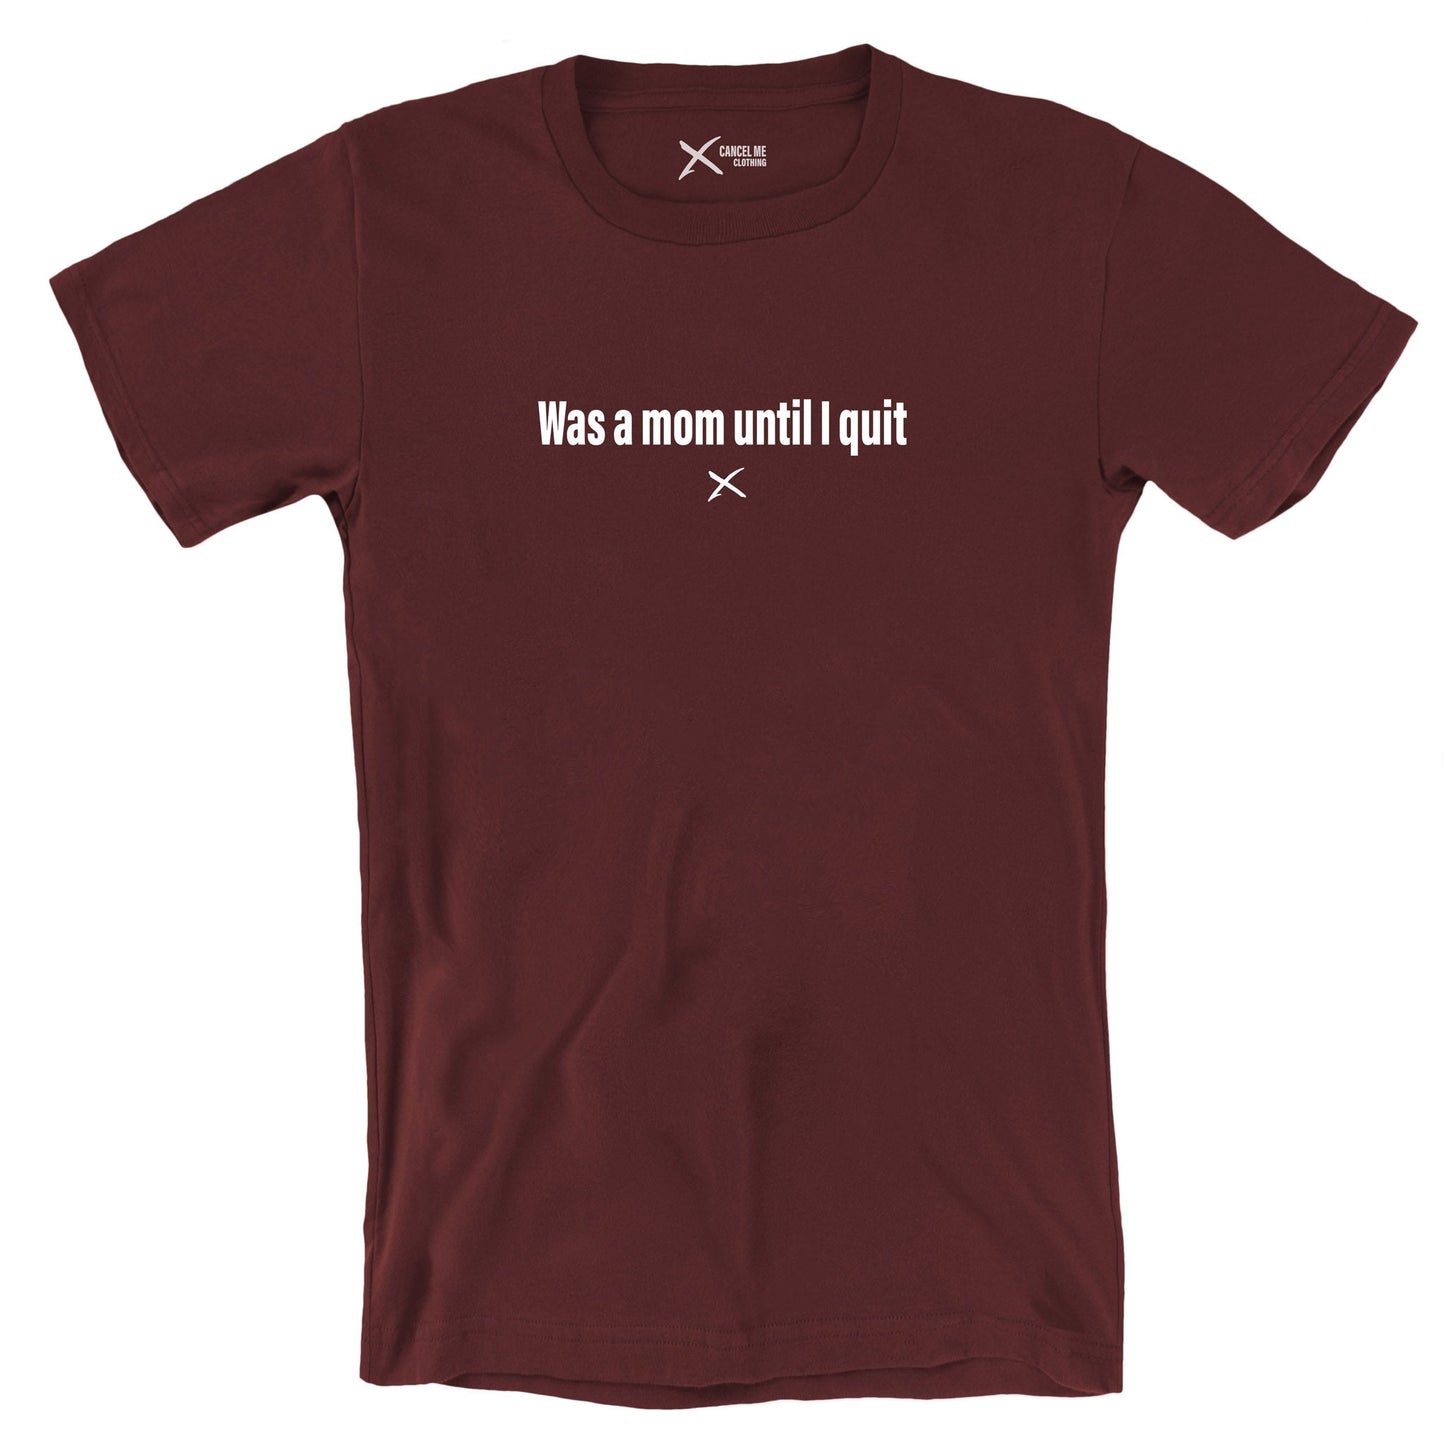 Was a mom until I quit - Shirt